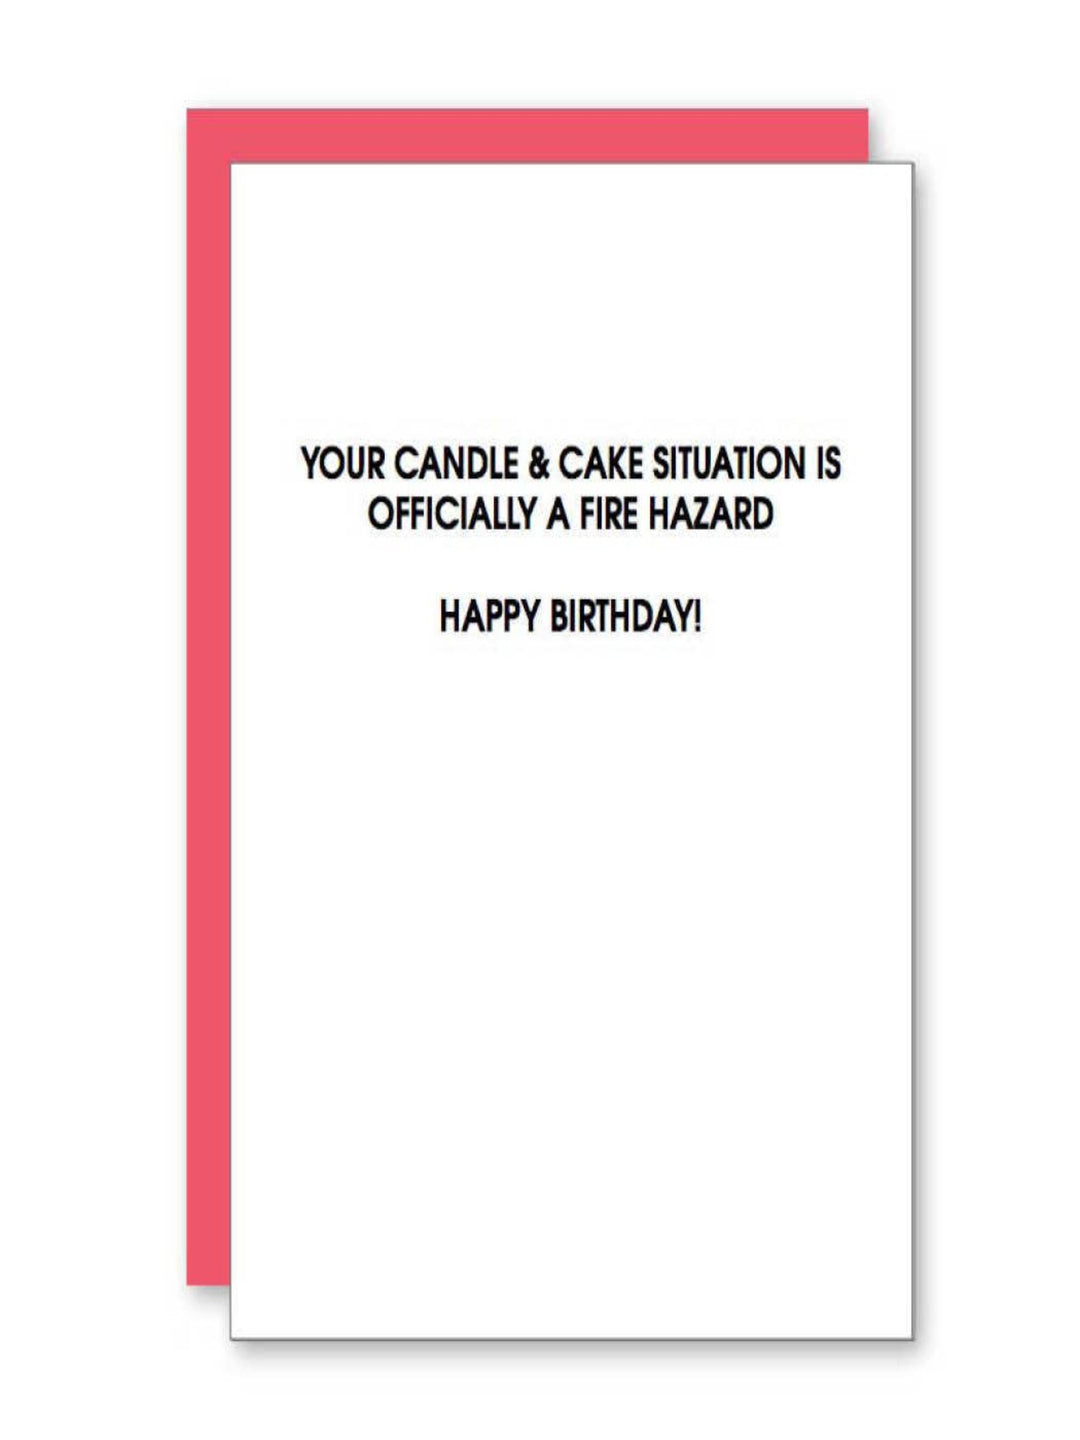 Greeting Card, Your Candle & Cake Situation is Officially a Fire Hazard